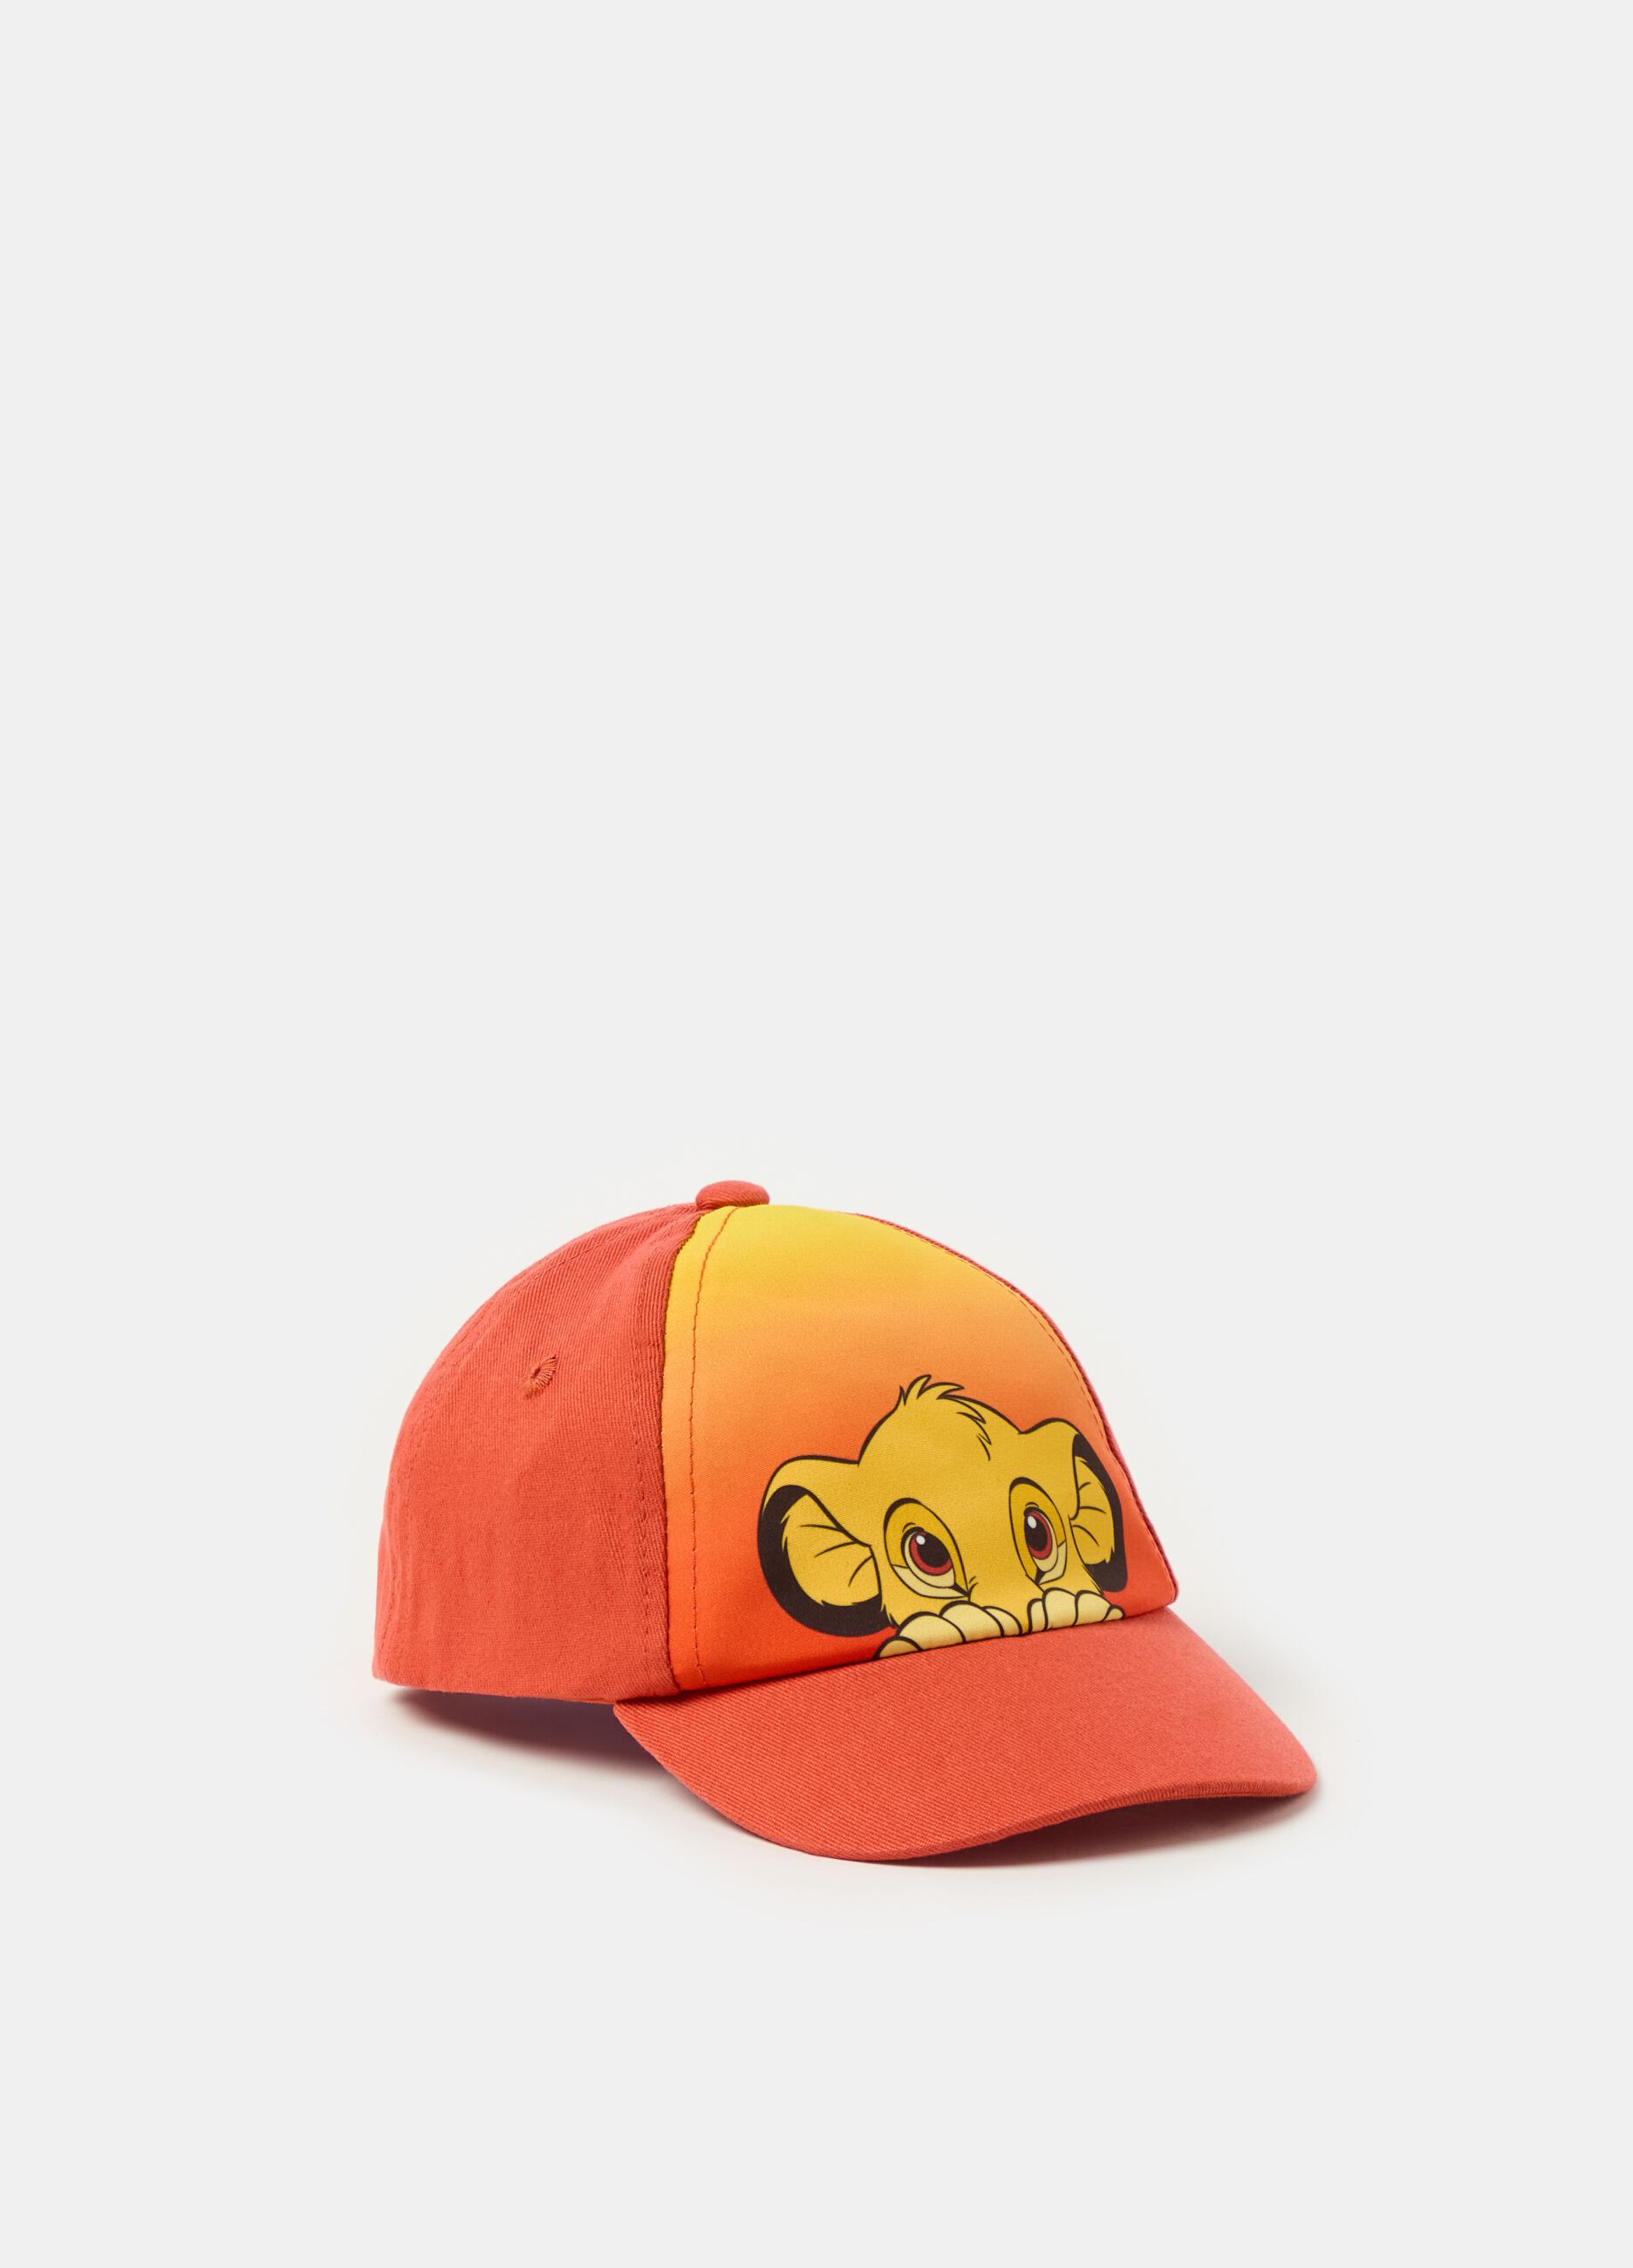 Organic cotton hat with The Lion King print